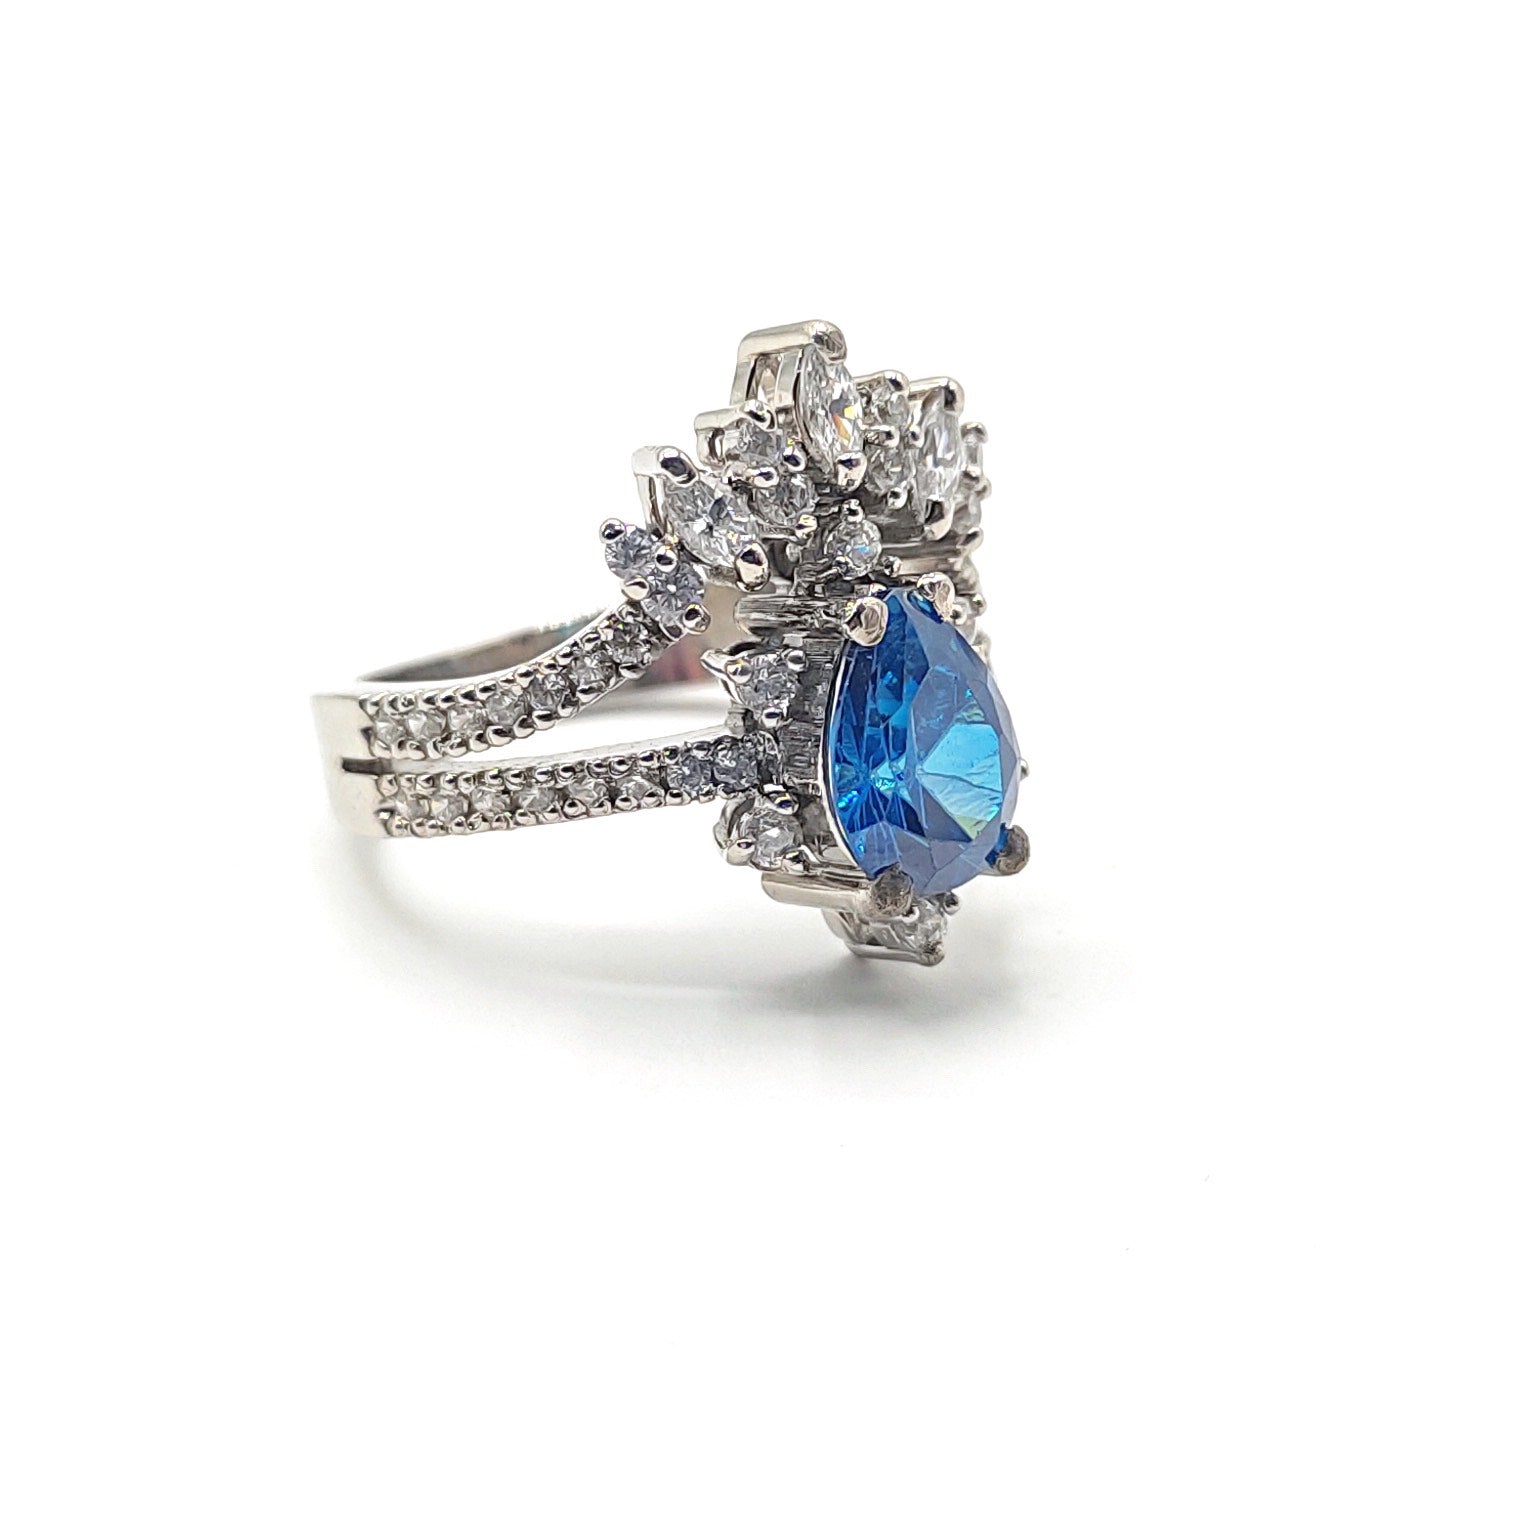 Pear Shaped Blue Sapphire Ring 925 Silver